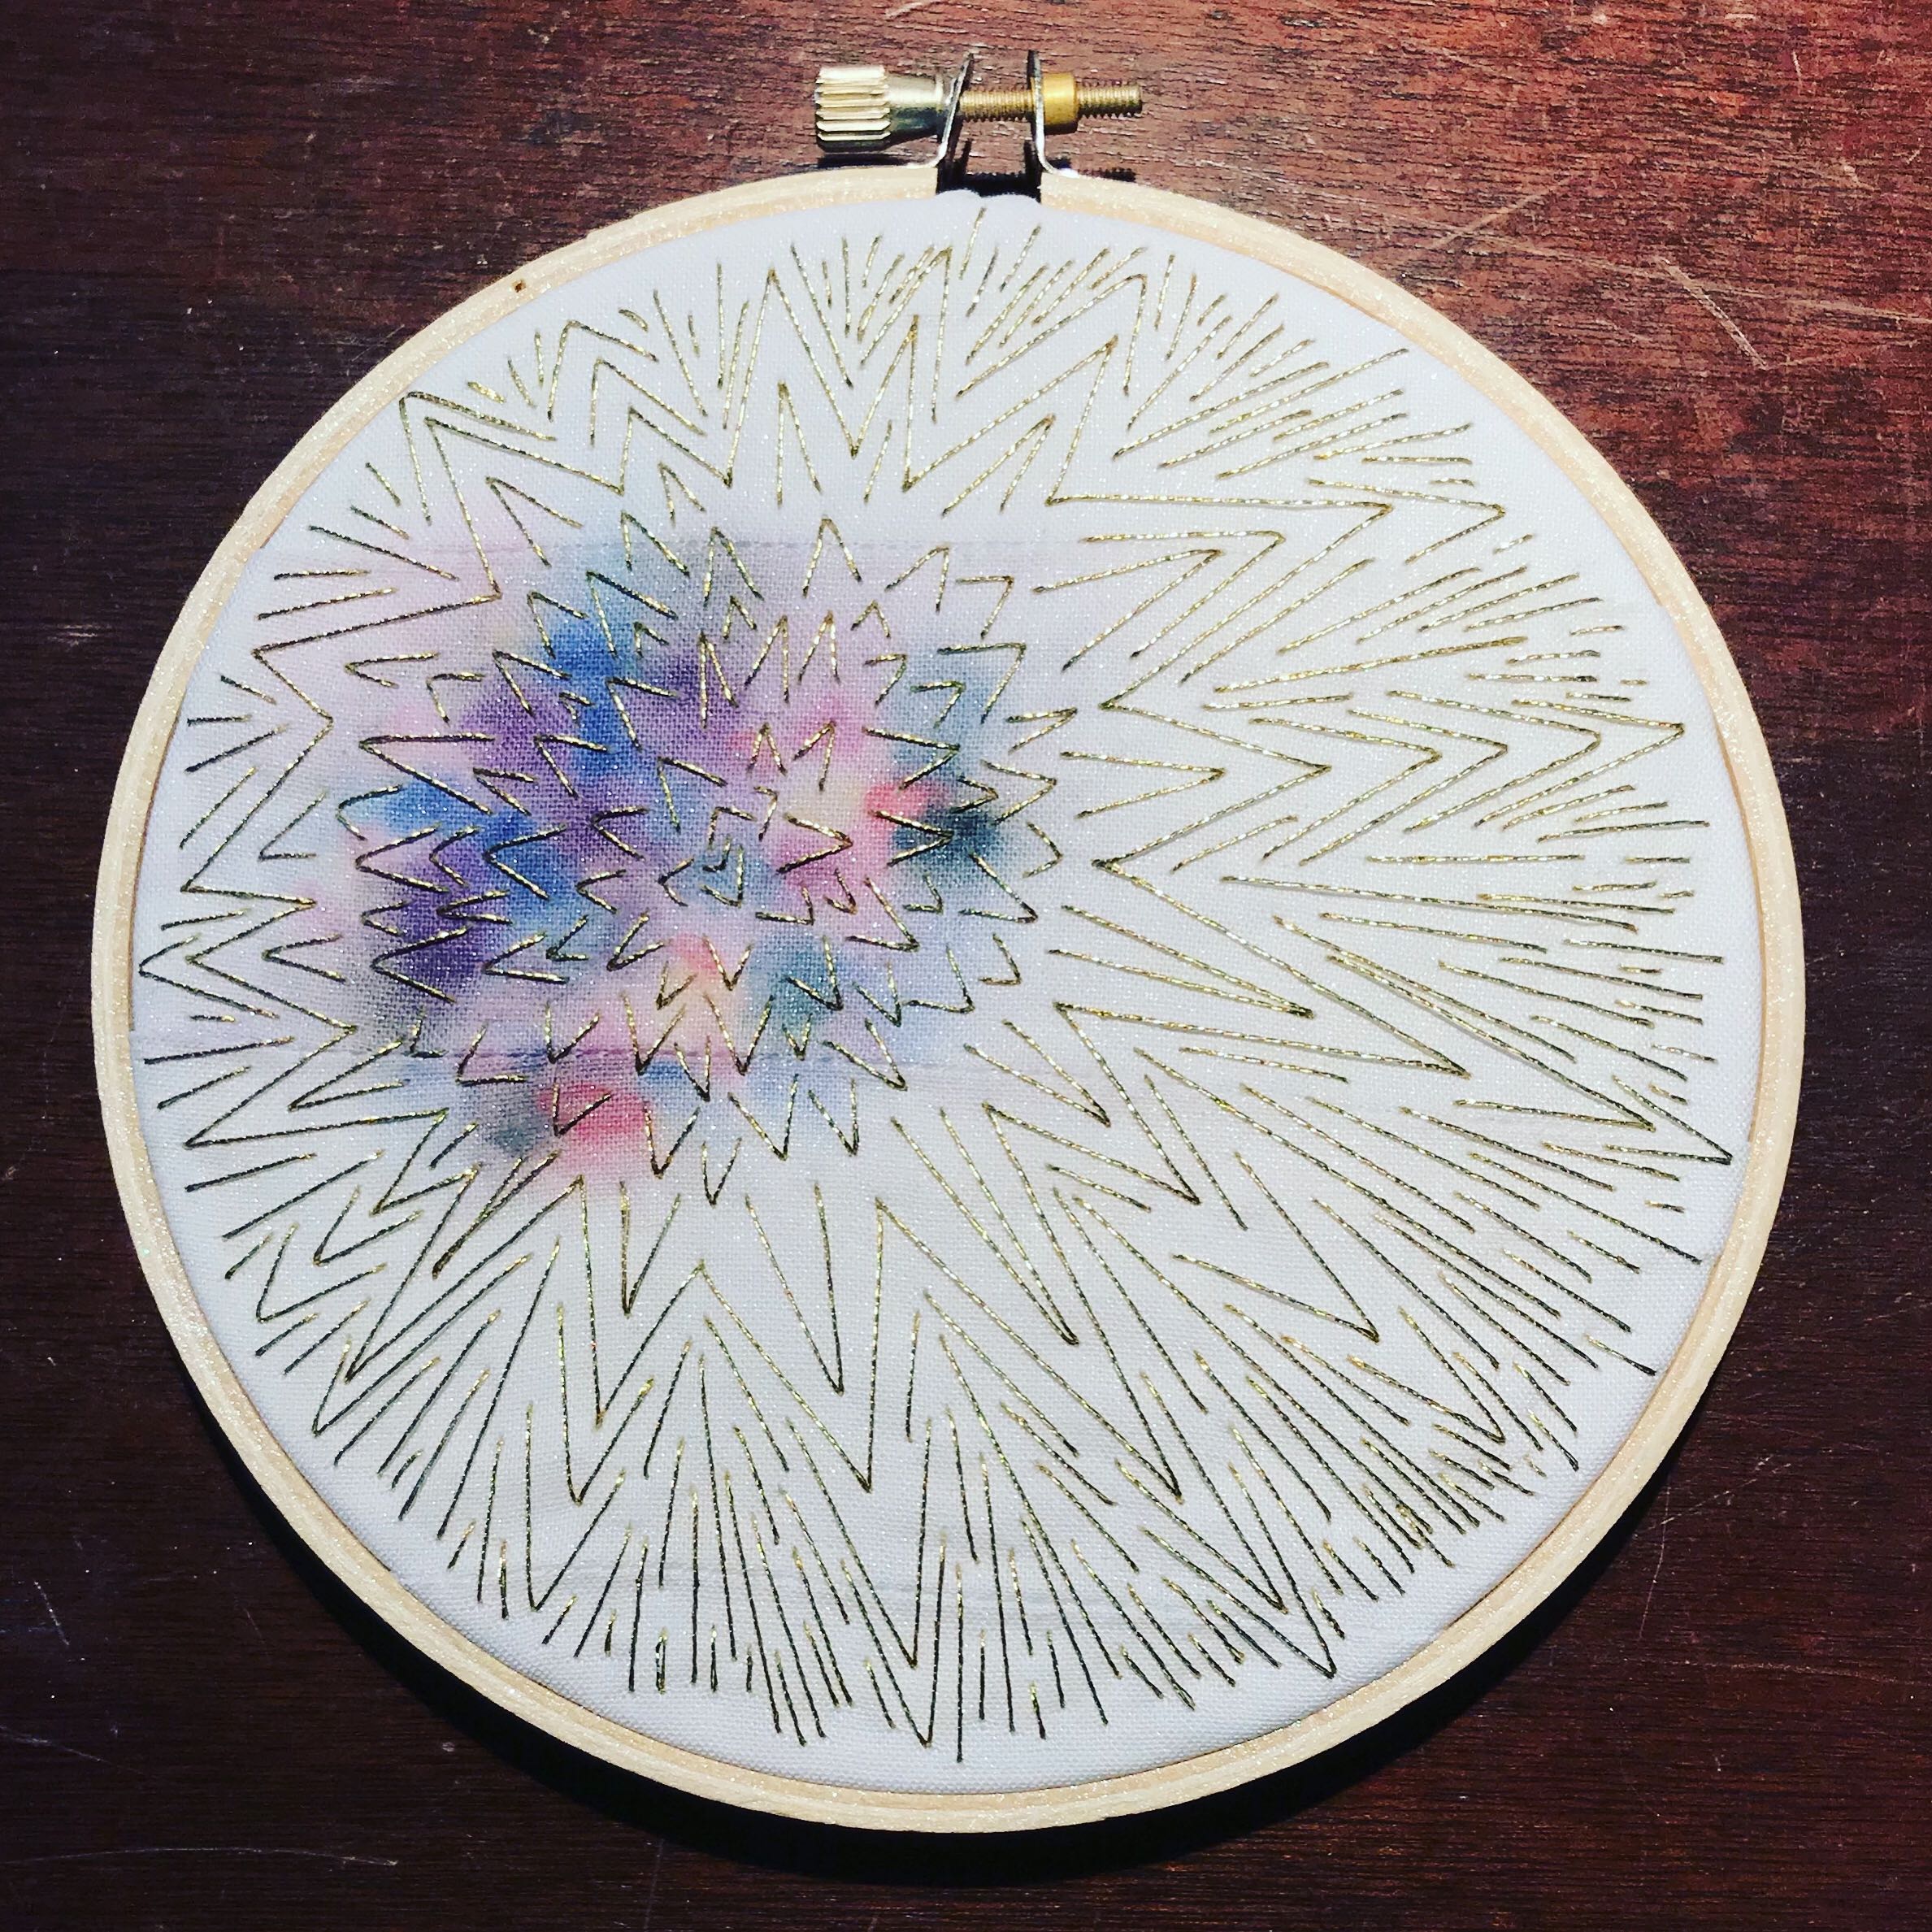 Boardable product support specialist Kara O'Neil does embroidery over watercolor artwork in her free time.